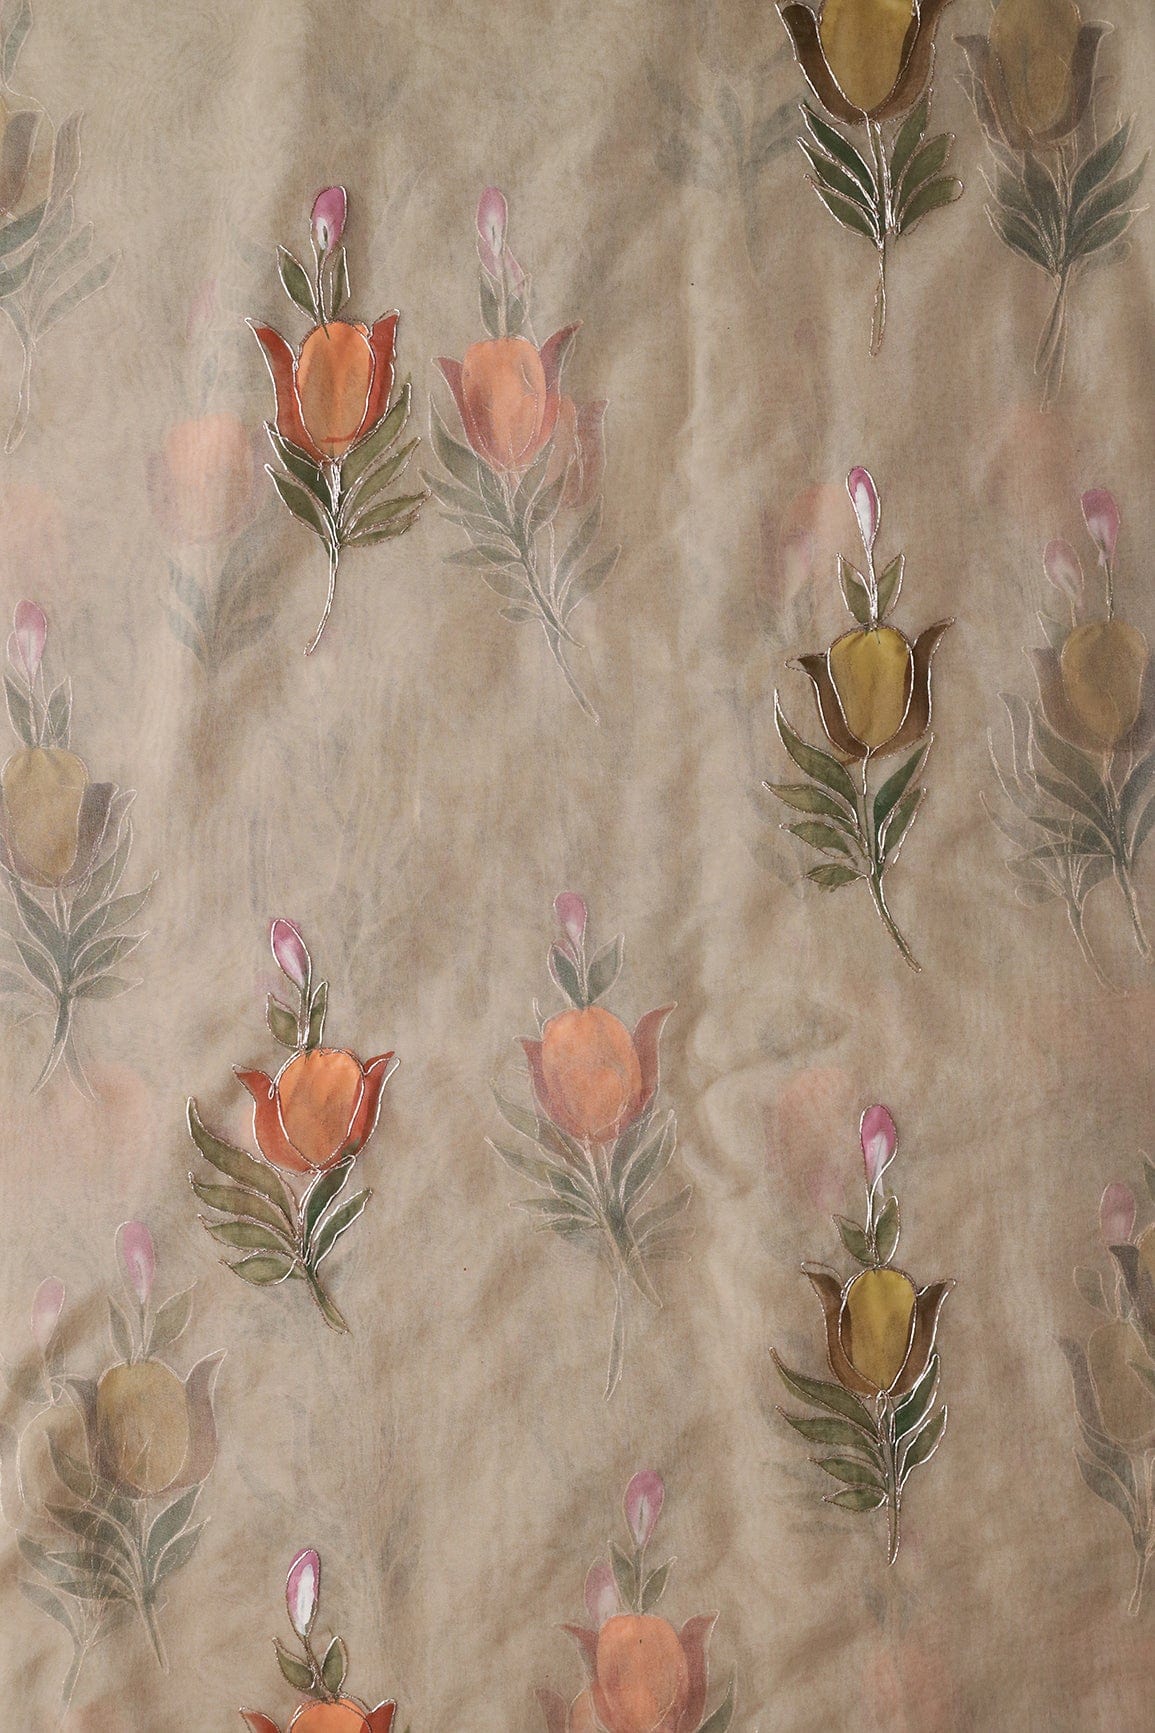 doeraa Embroidery Fabrics Beautiful Floral Hand Painted With Embroidery Work On Light Beige Organza Fabric